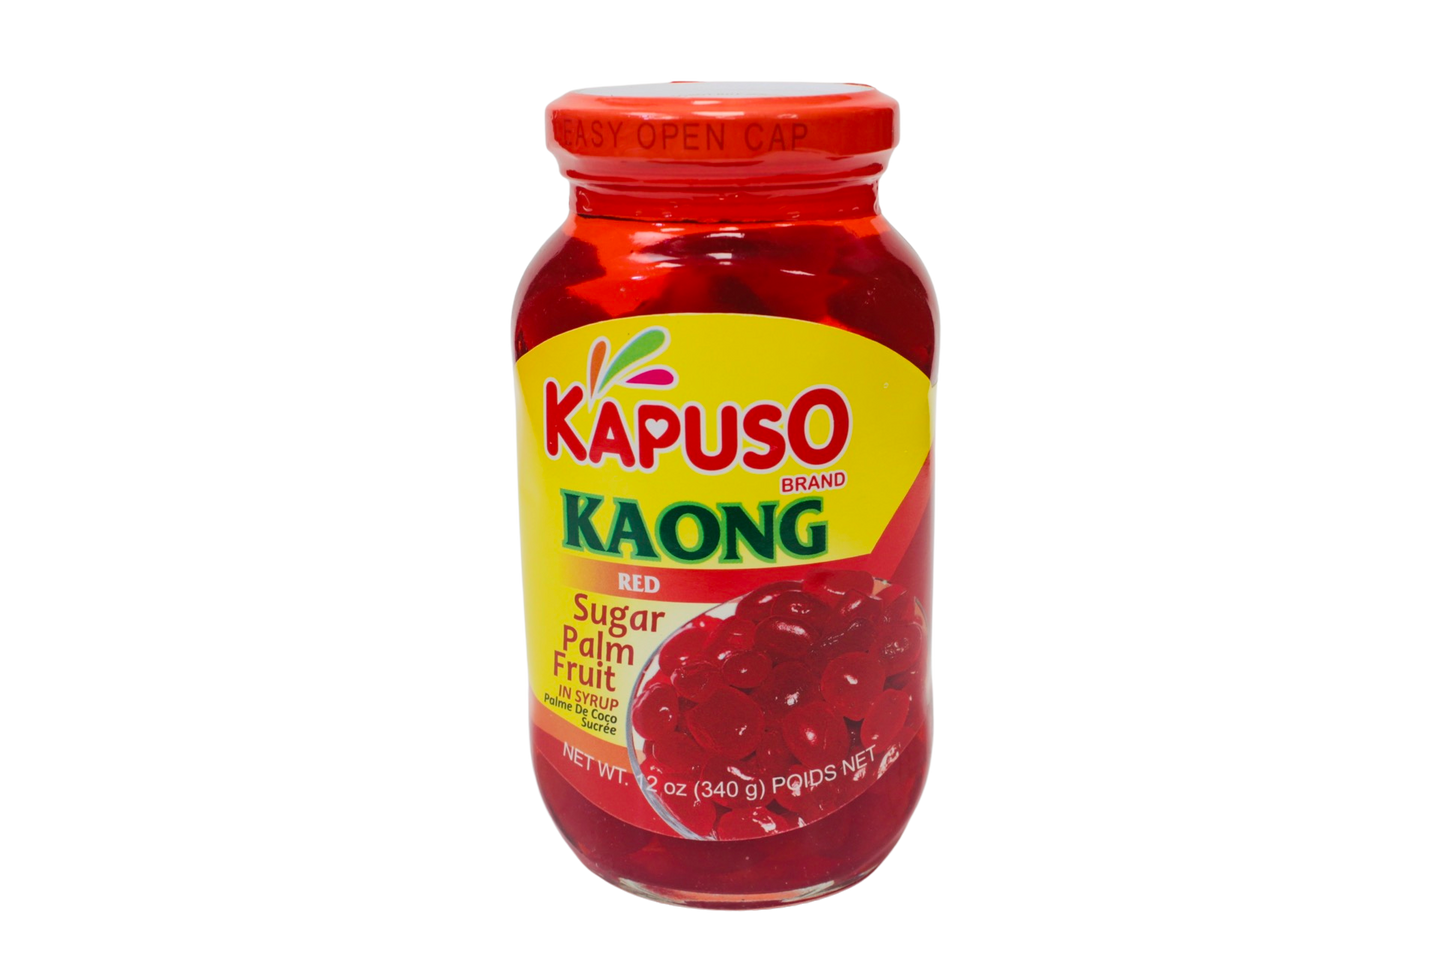 Kapuso Brand Kaong Sugar Palm Fruit in Syrup (Red) 340g